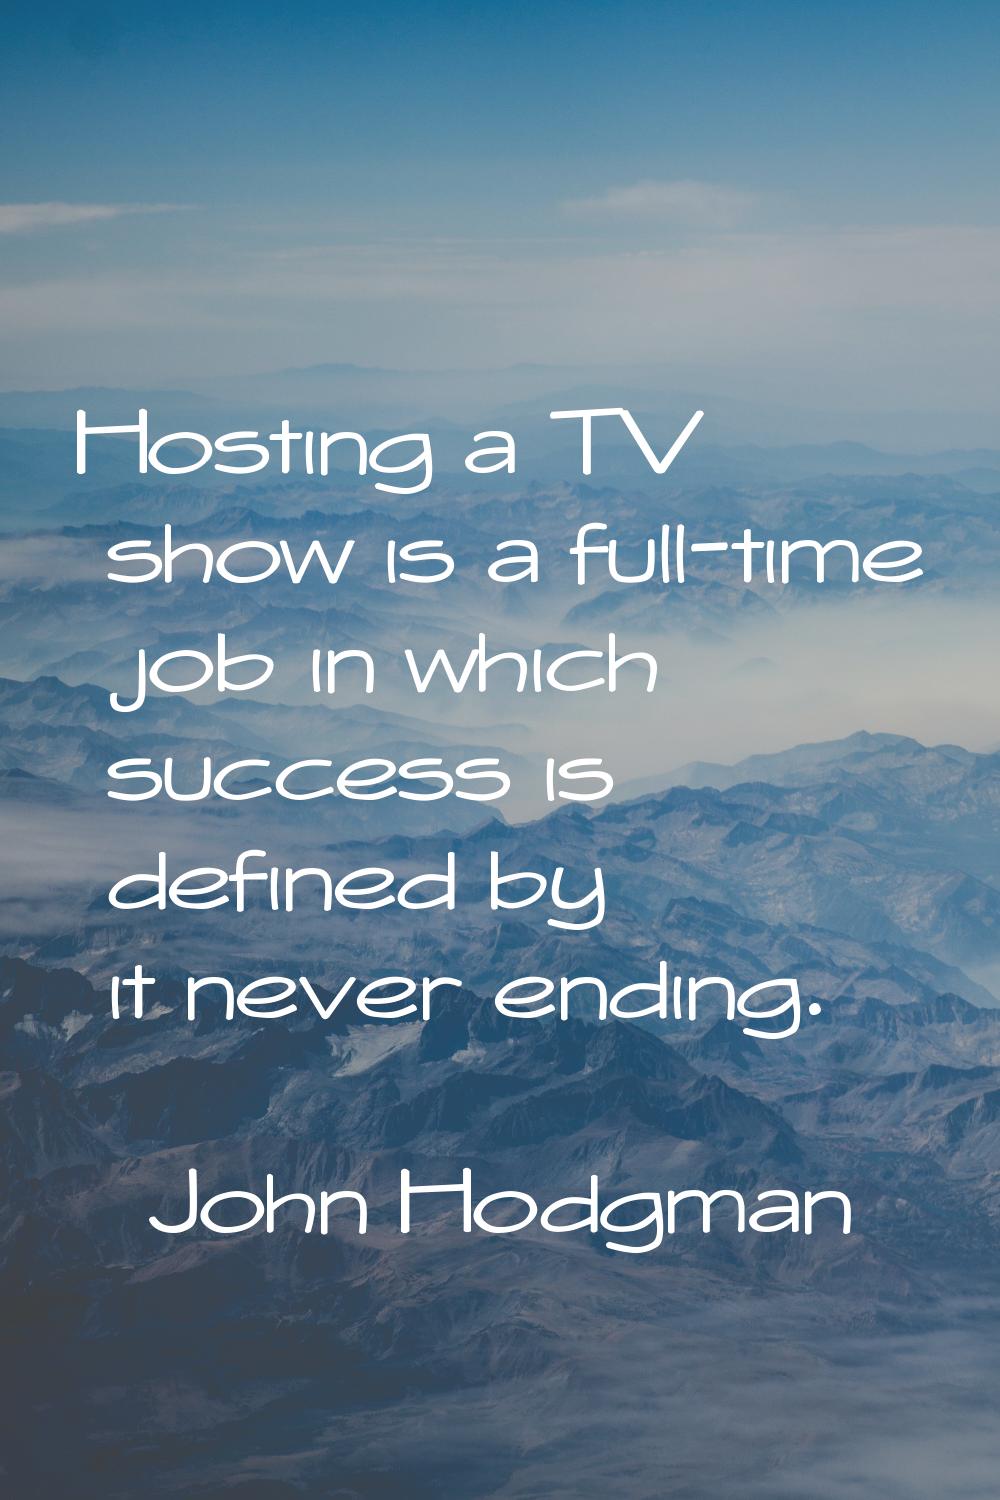 Hosting a TV show is a full-time job in which success is defined by it never ending.